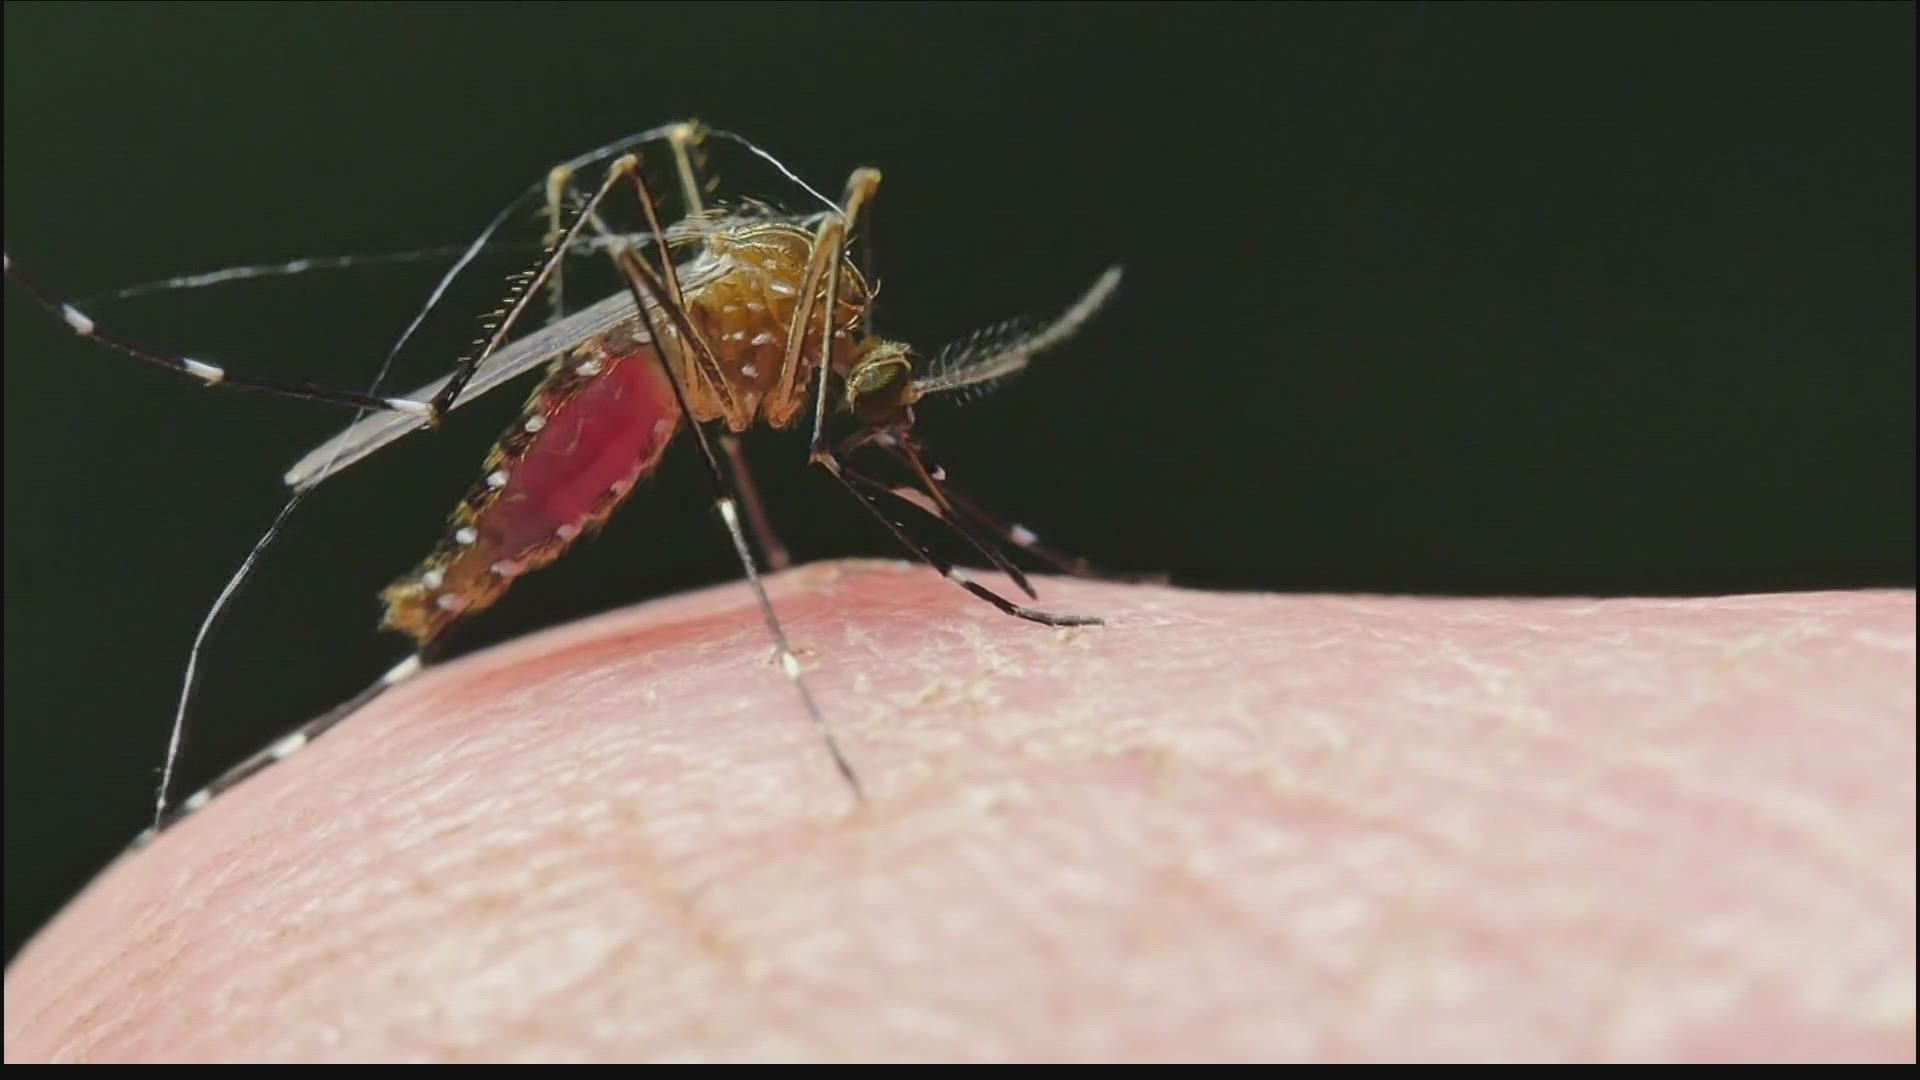 The EPA has approved extending a pilot program for two more years that would allow millions of genetically modified mosquitoes to be released in the Florida Keys.